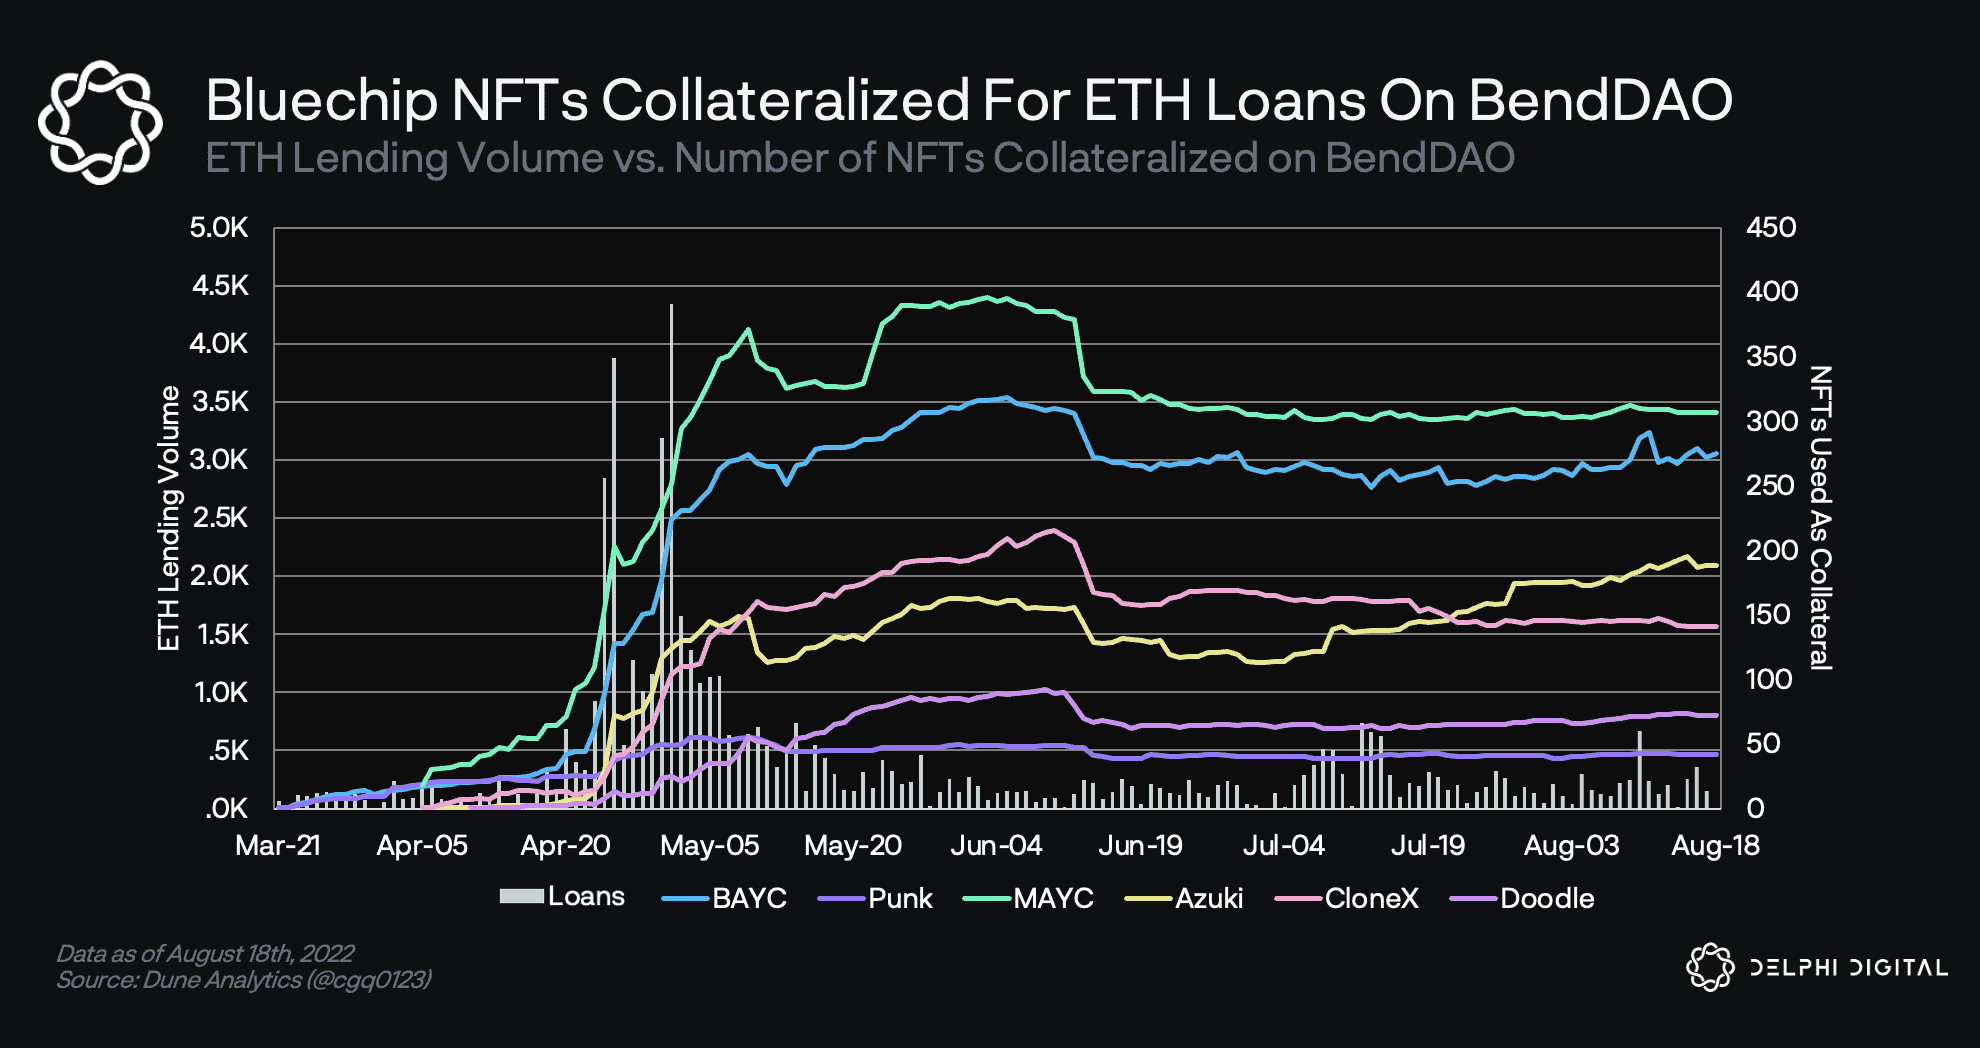 Bluechip NFTs collateralized for ETH loans on BendDAO, chart by Delphi Digital.